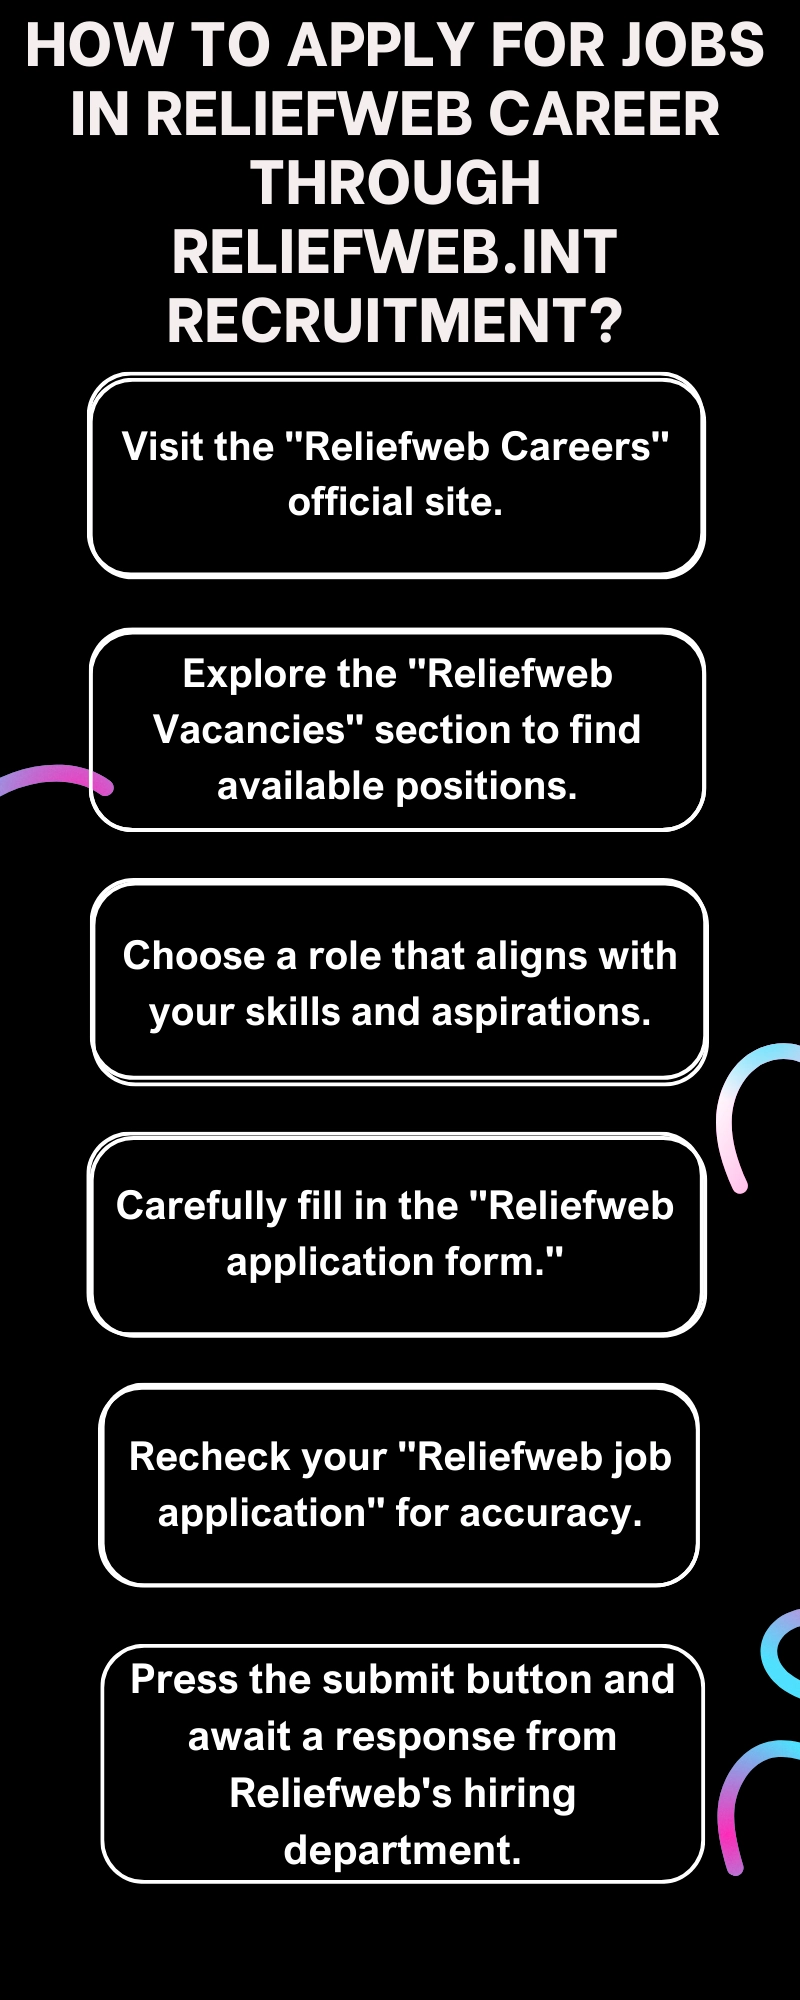 How to Apply for Jobs in Reliefweb Career through reliefweb.int recruitment?